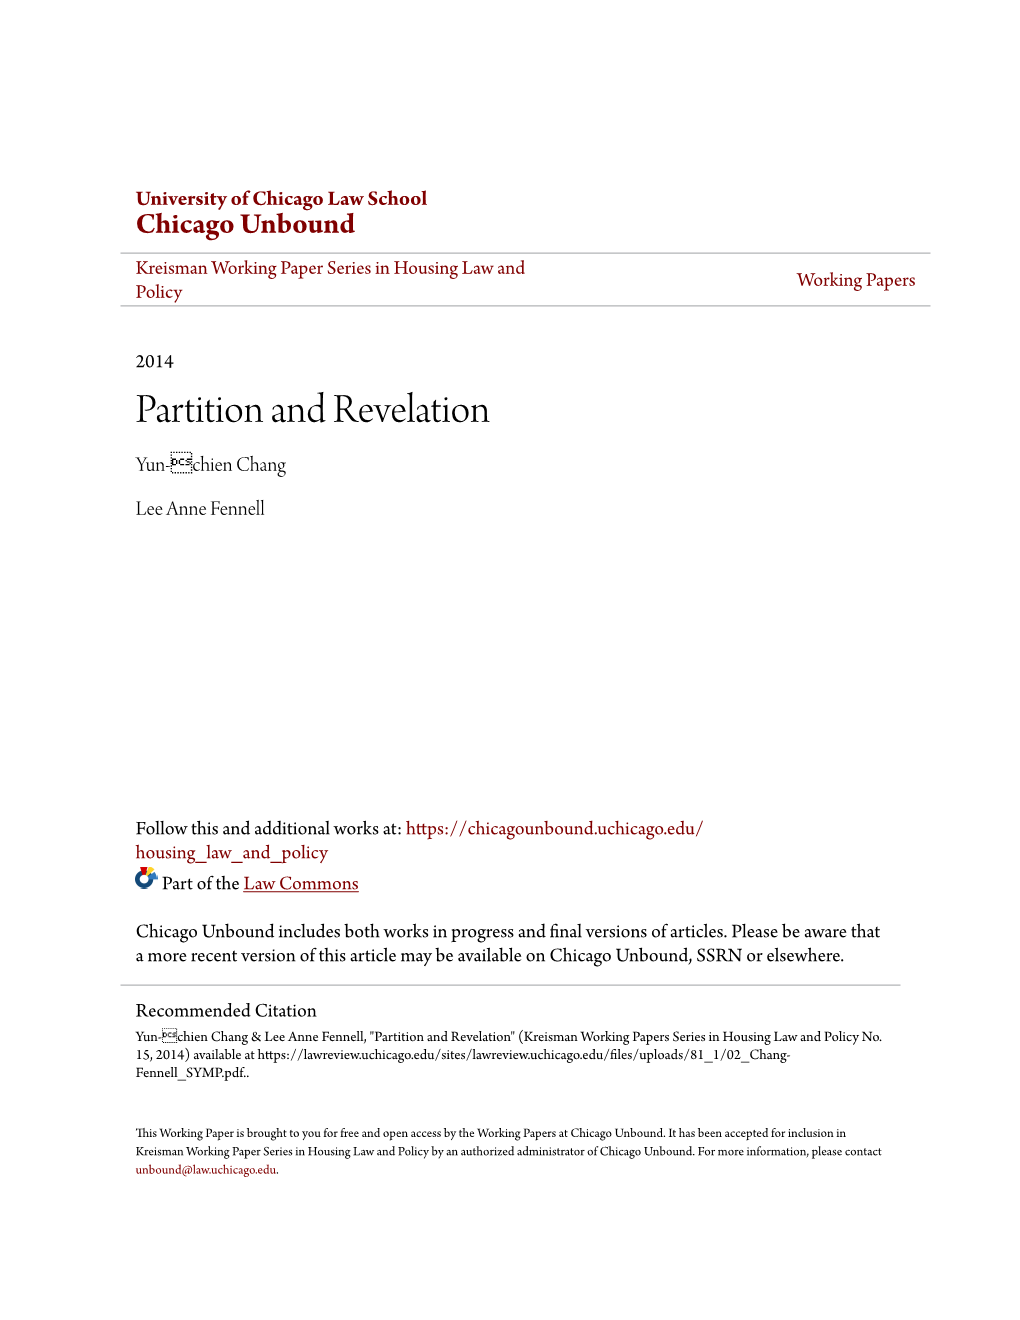 Partition and Revelation Yun-Chien Chang